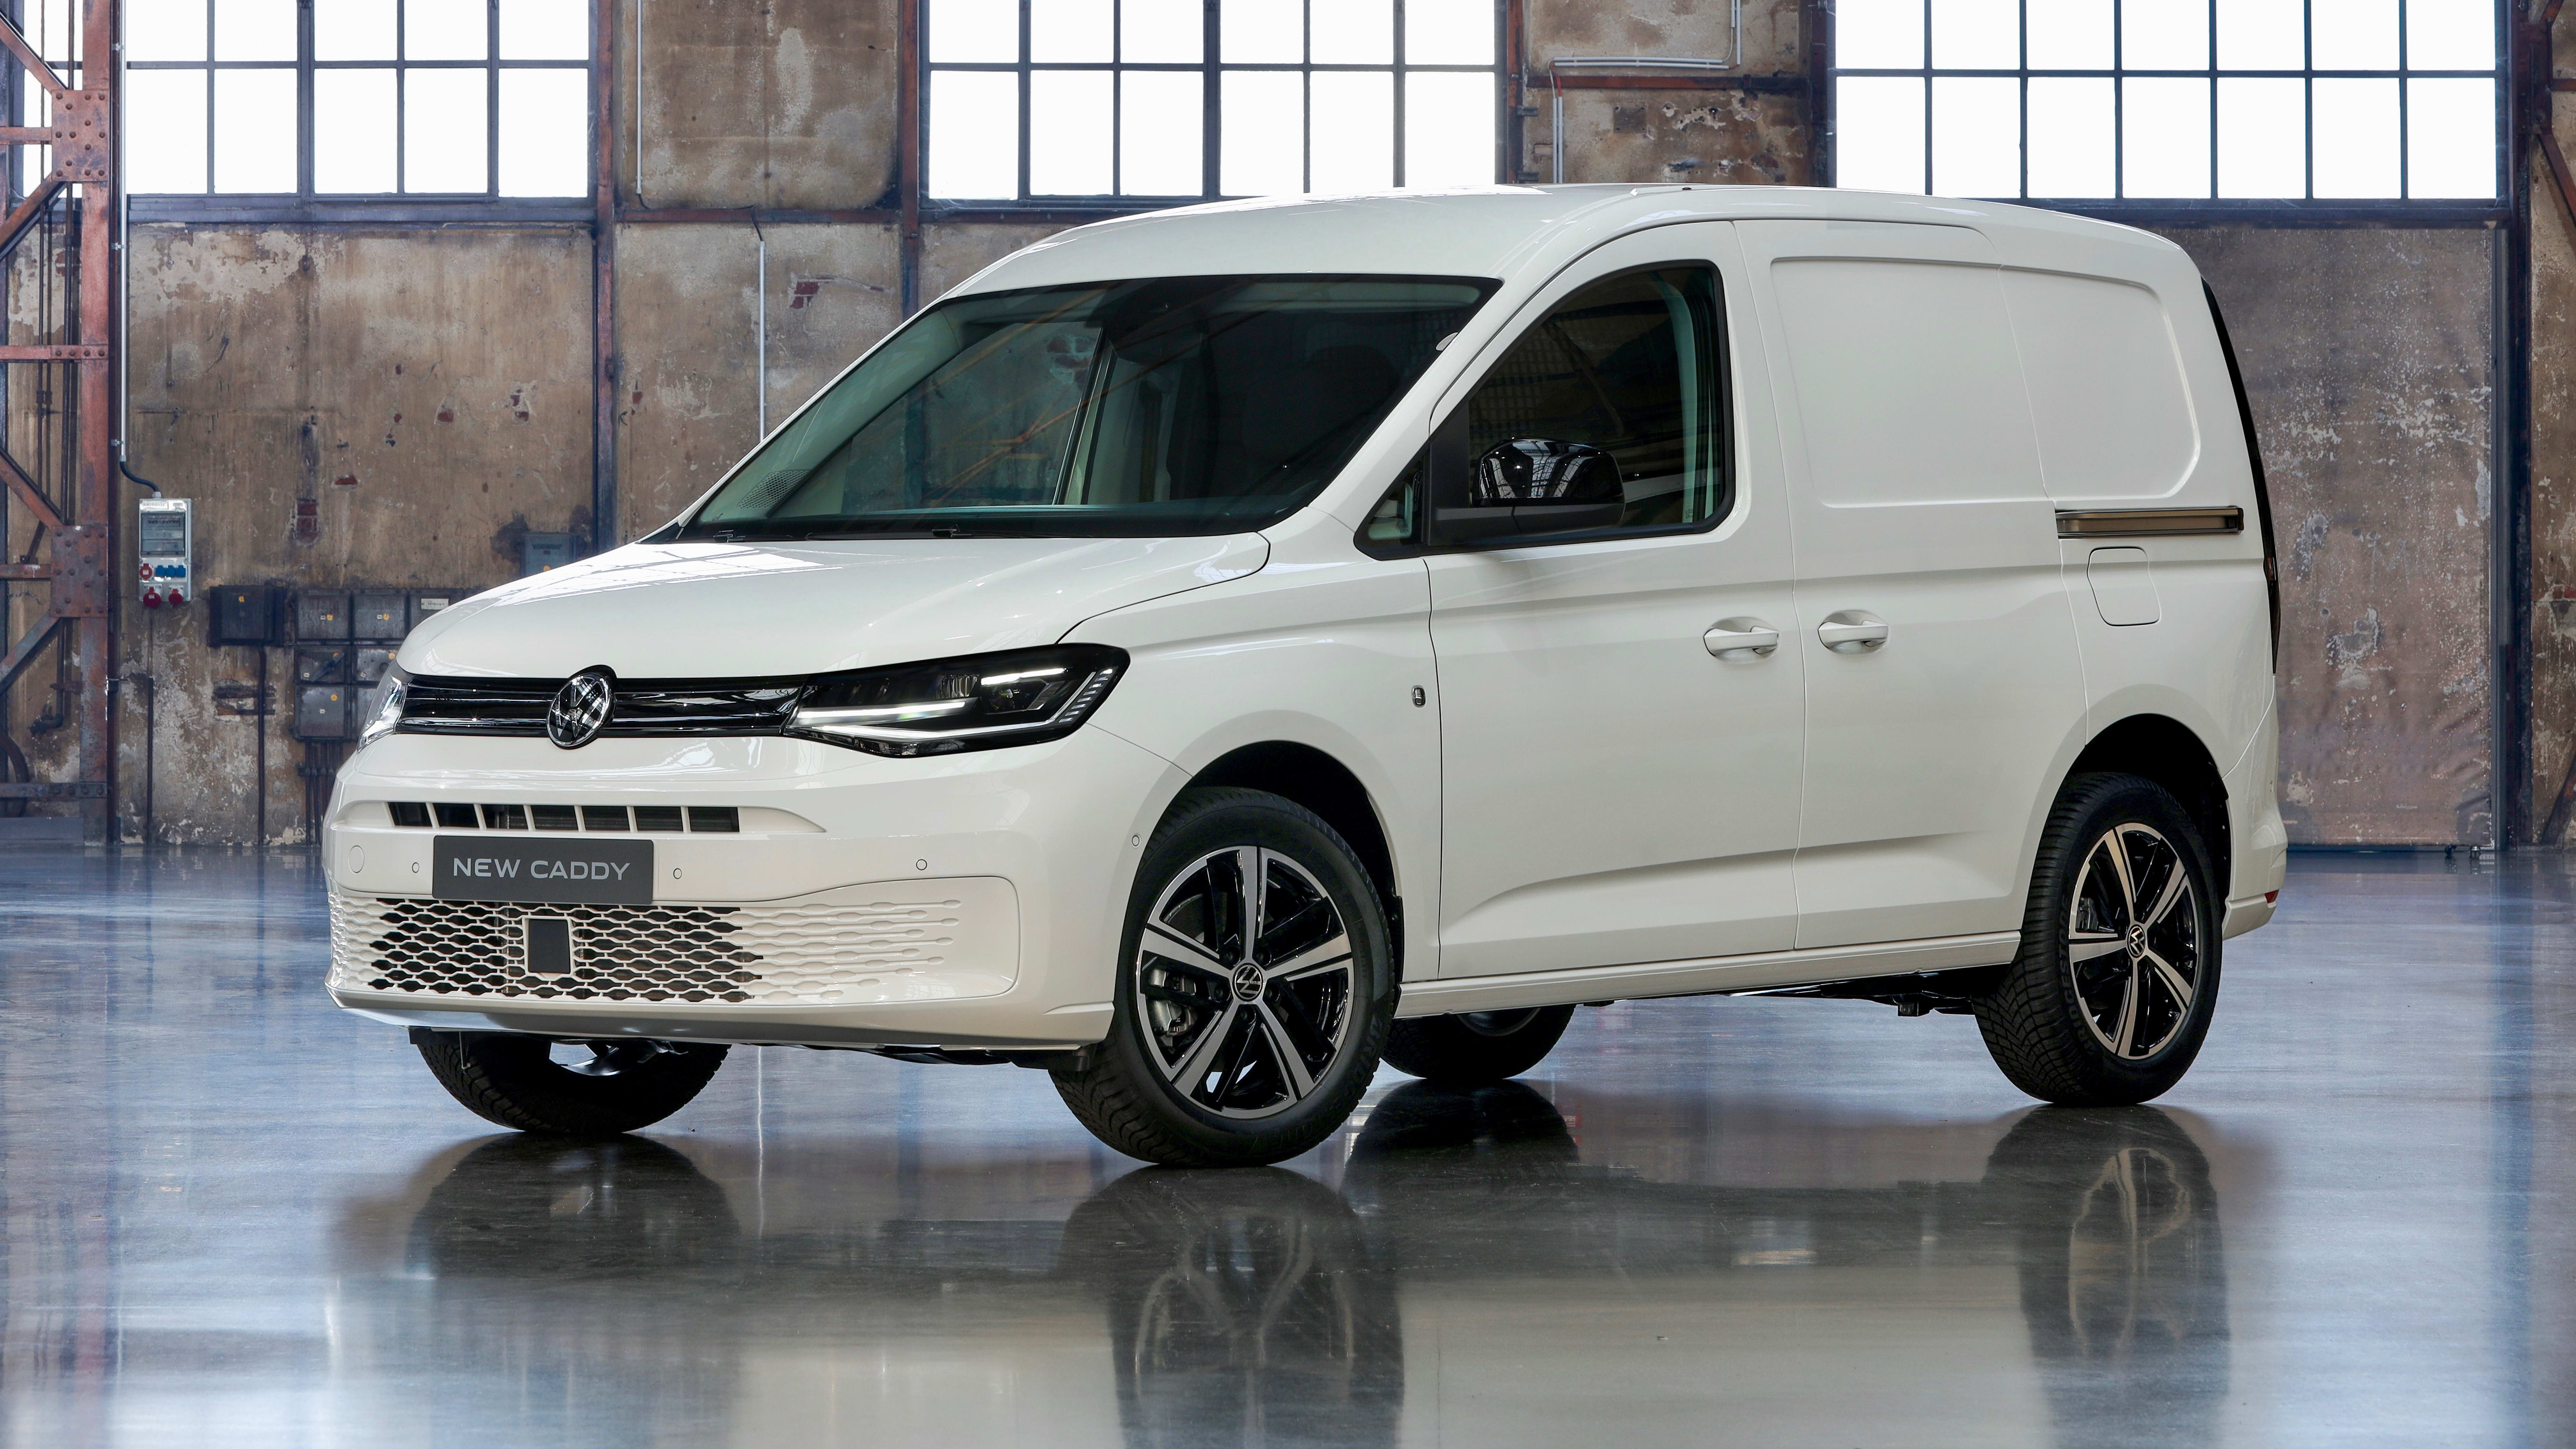 2021 Volkswagen Caddy Launches In Europe Australian Timing Pushed Out Caradvice